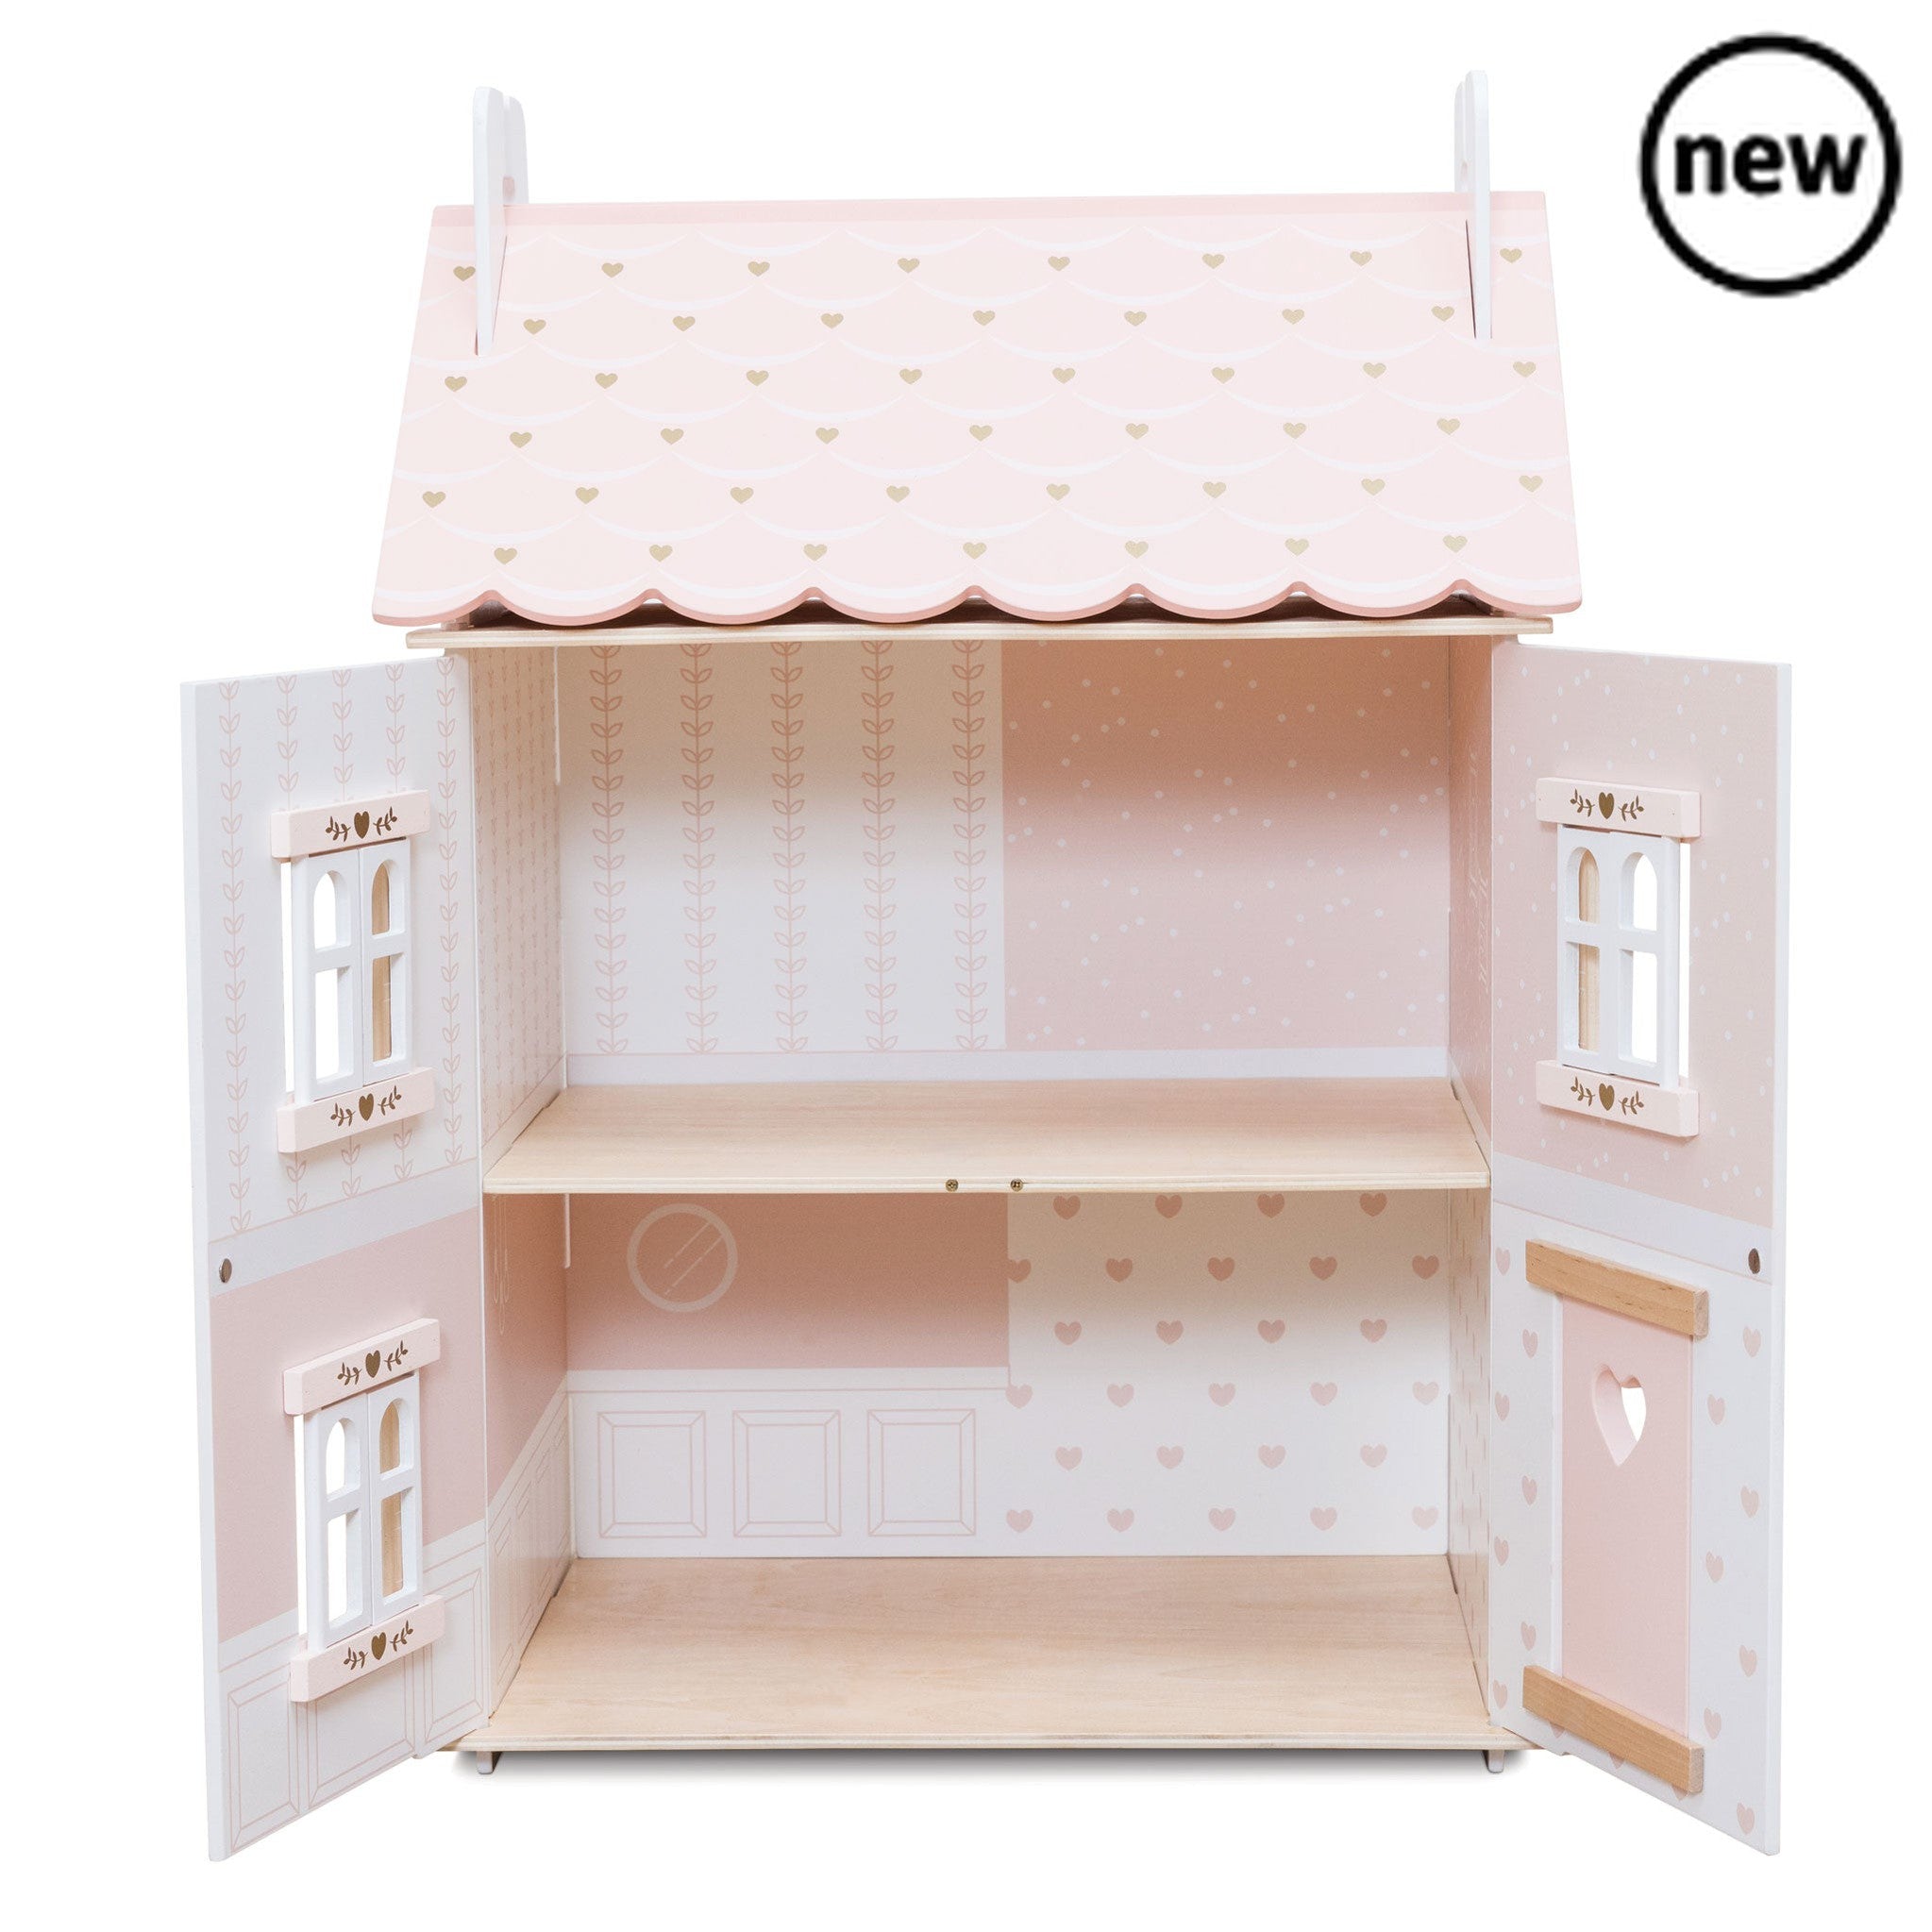 Rose Heart House, Description Welcome home. This delightful dolls house makes a stunning gift for a special little someone. Painted in fresh white with soft pink accents and gold heart motifs, it is ready to move right in to. Crafted from sustainable FSC® - certified wood, this durable, high quality toy features a scalloped roof, opening and closing doors and shutters for realistic play, plus a clever lift off roof that reveals access to a sweet attic bedroom. Inside, the floors are furnished in a lovely na